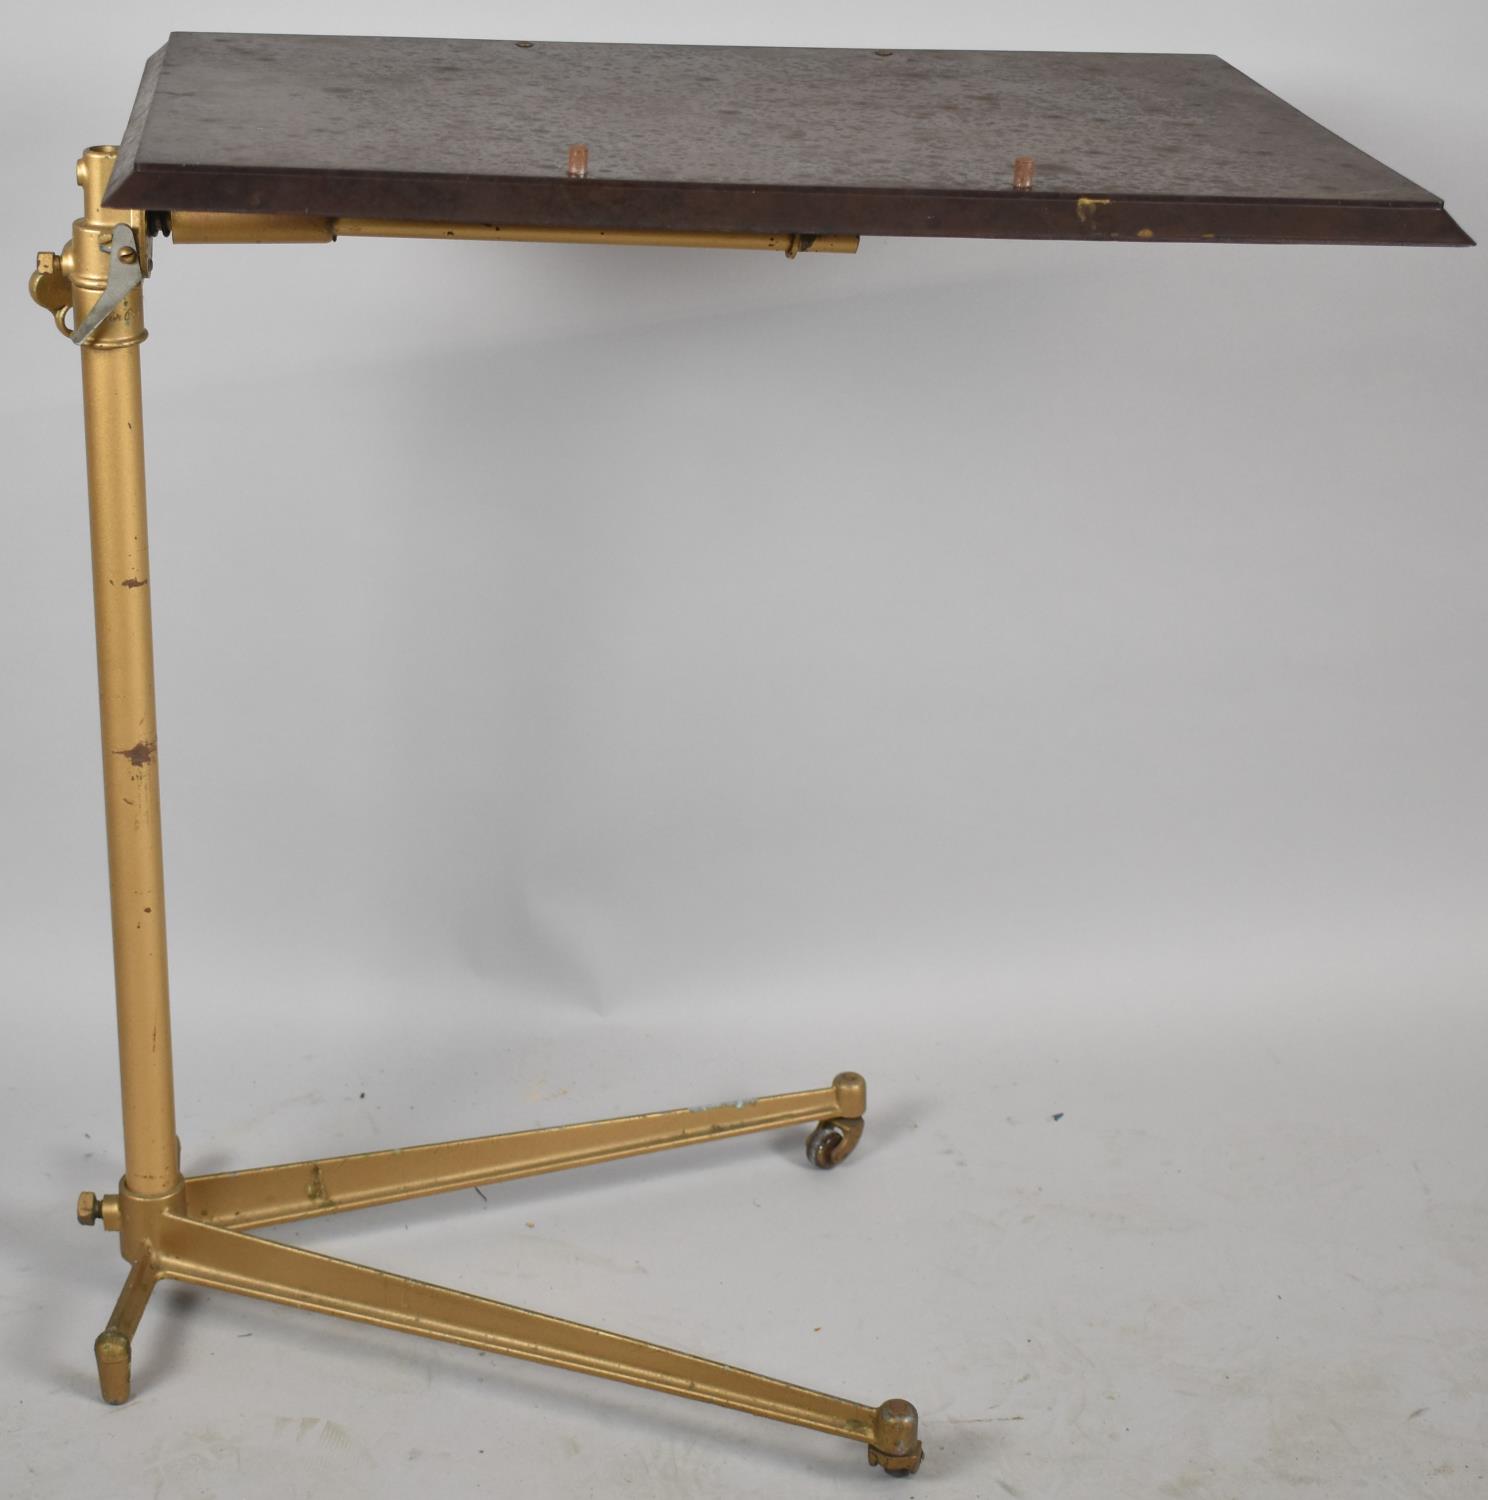 A Vintage Iron Based Peter Pan 'Paragon' Adjustable Reading Table, 58x37cm - Image 2 of 2